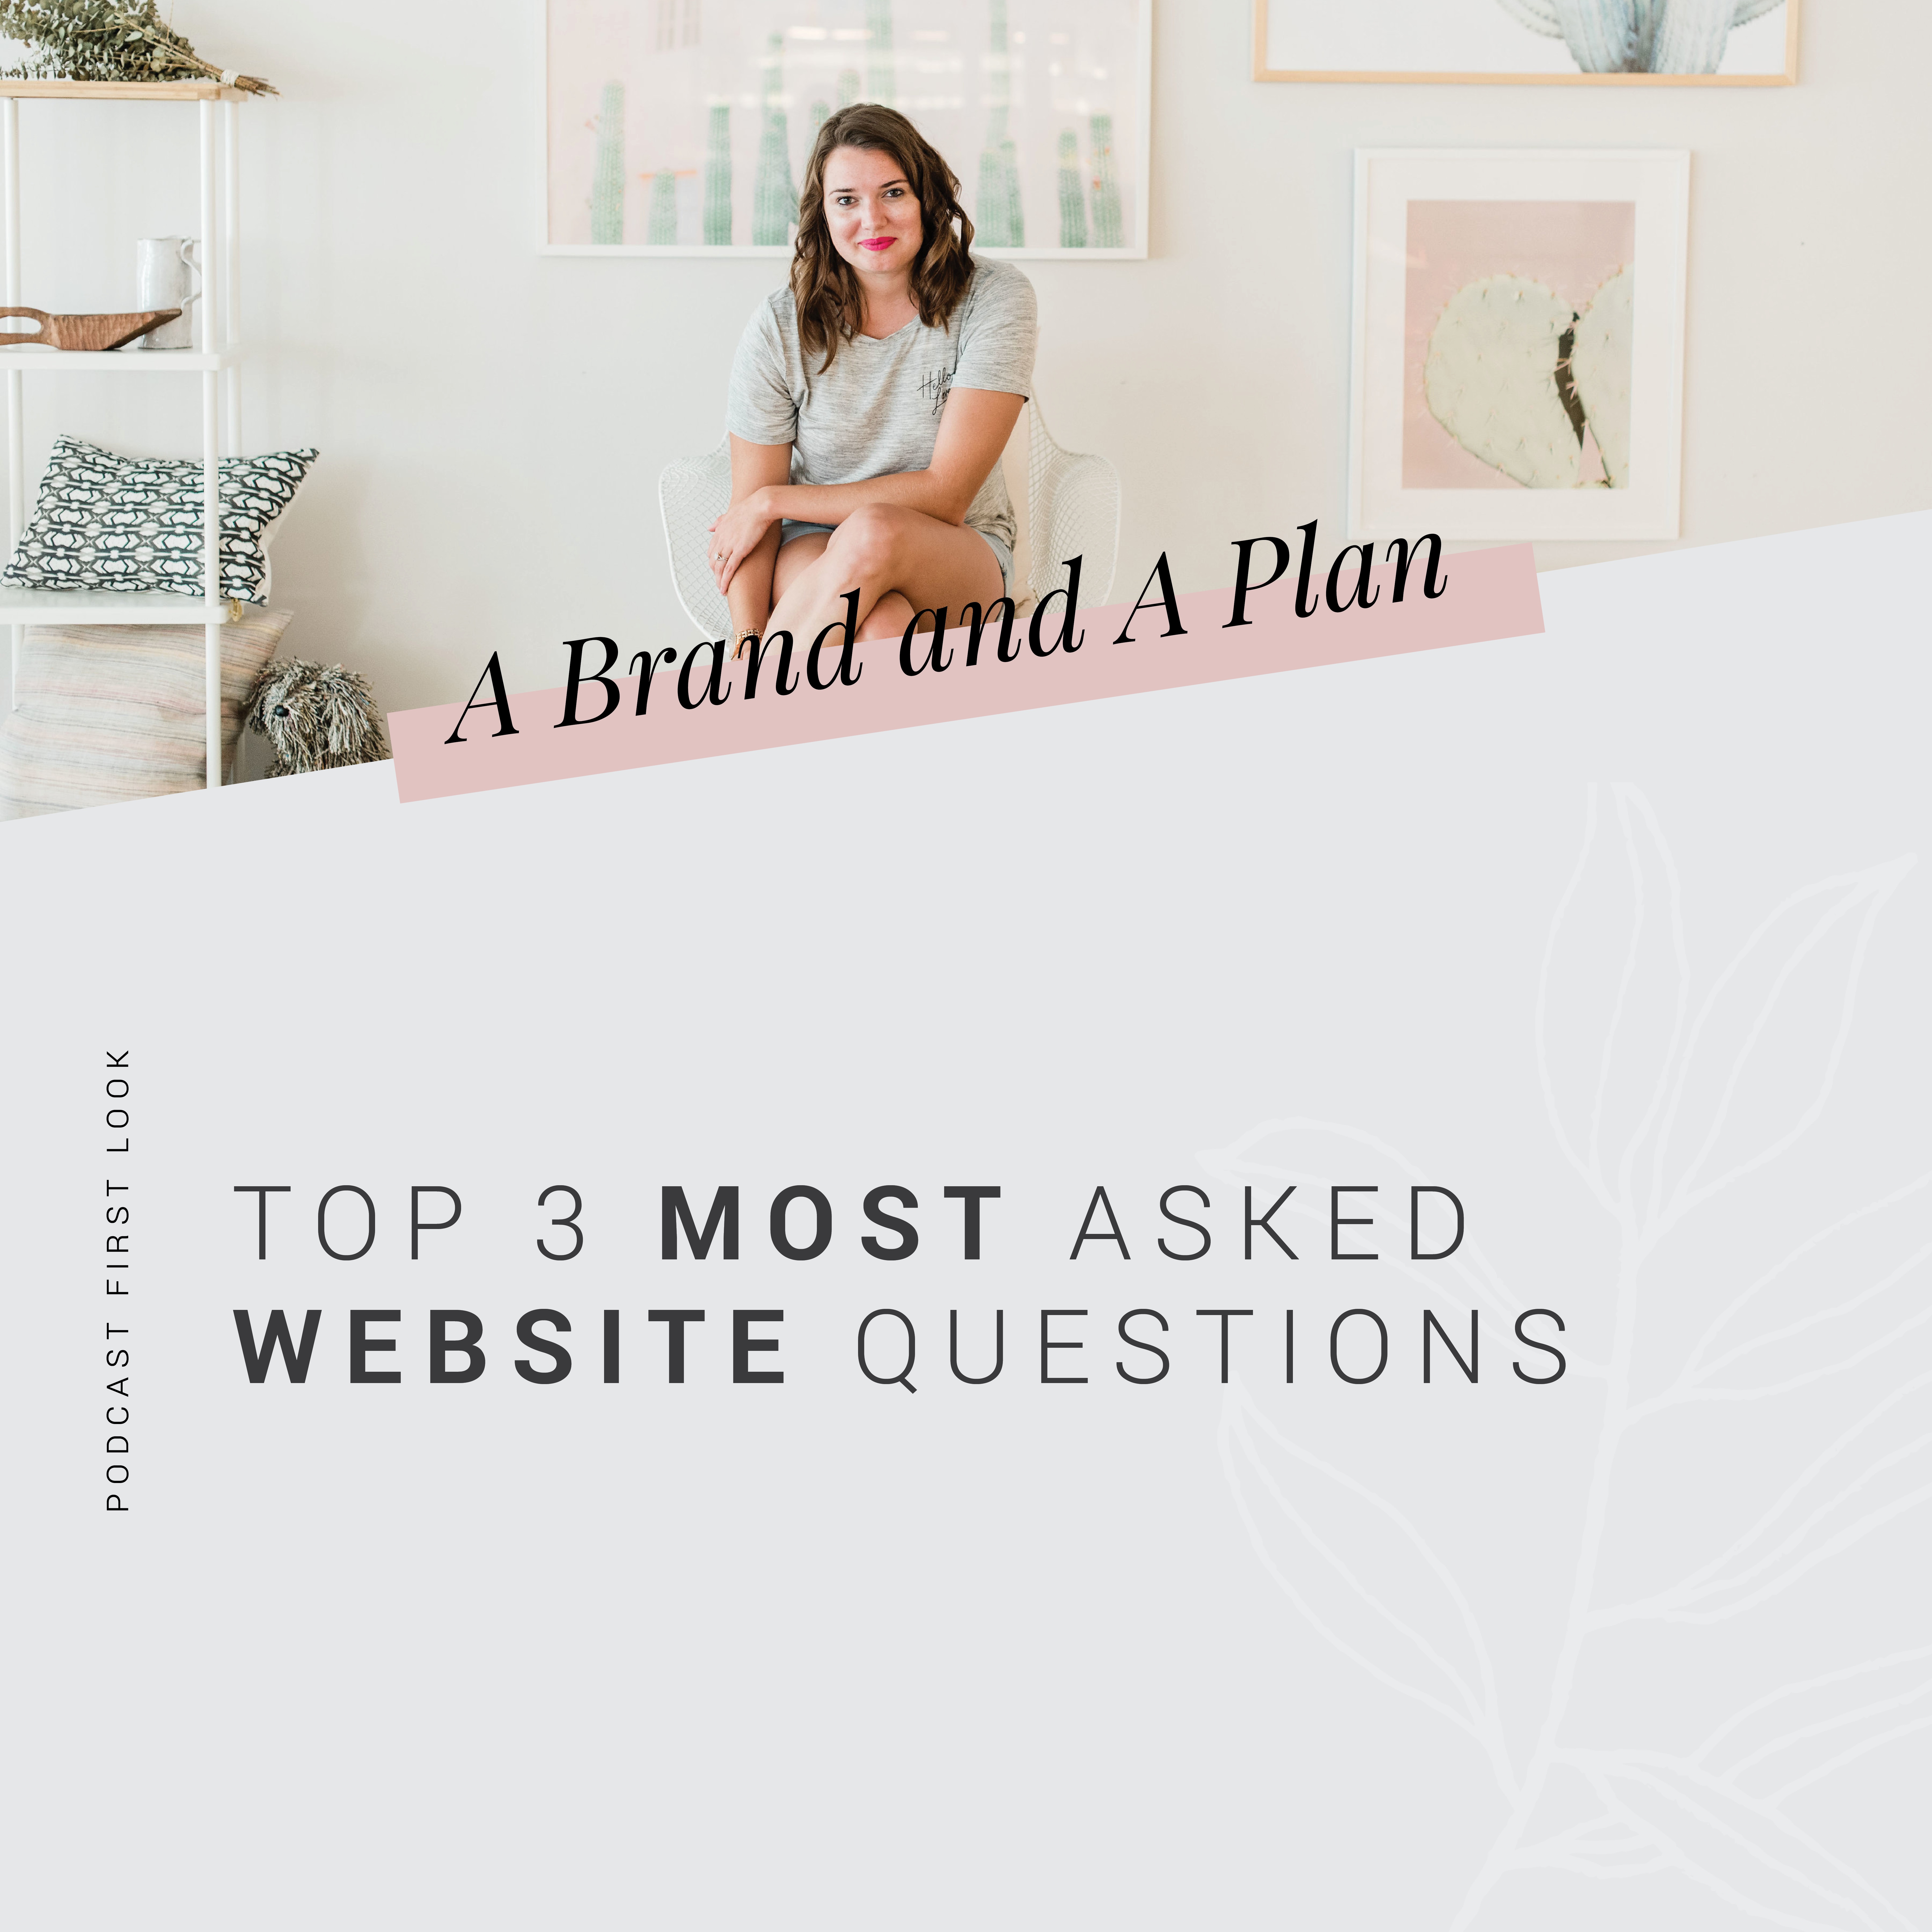 Top 3 Most Asked Website Questions